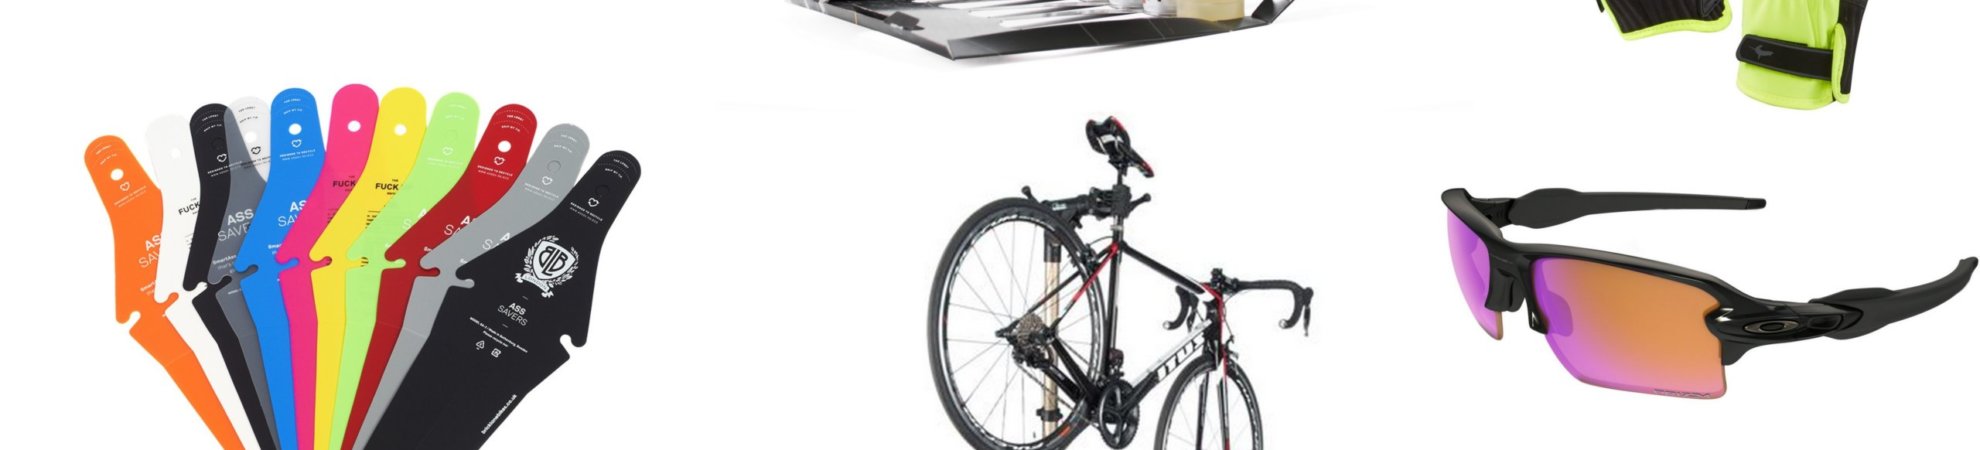 Gift ideas for cyclists ead image